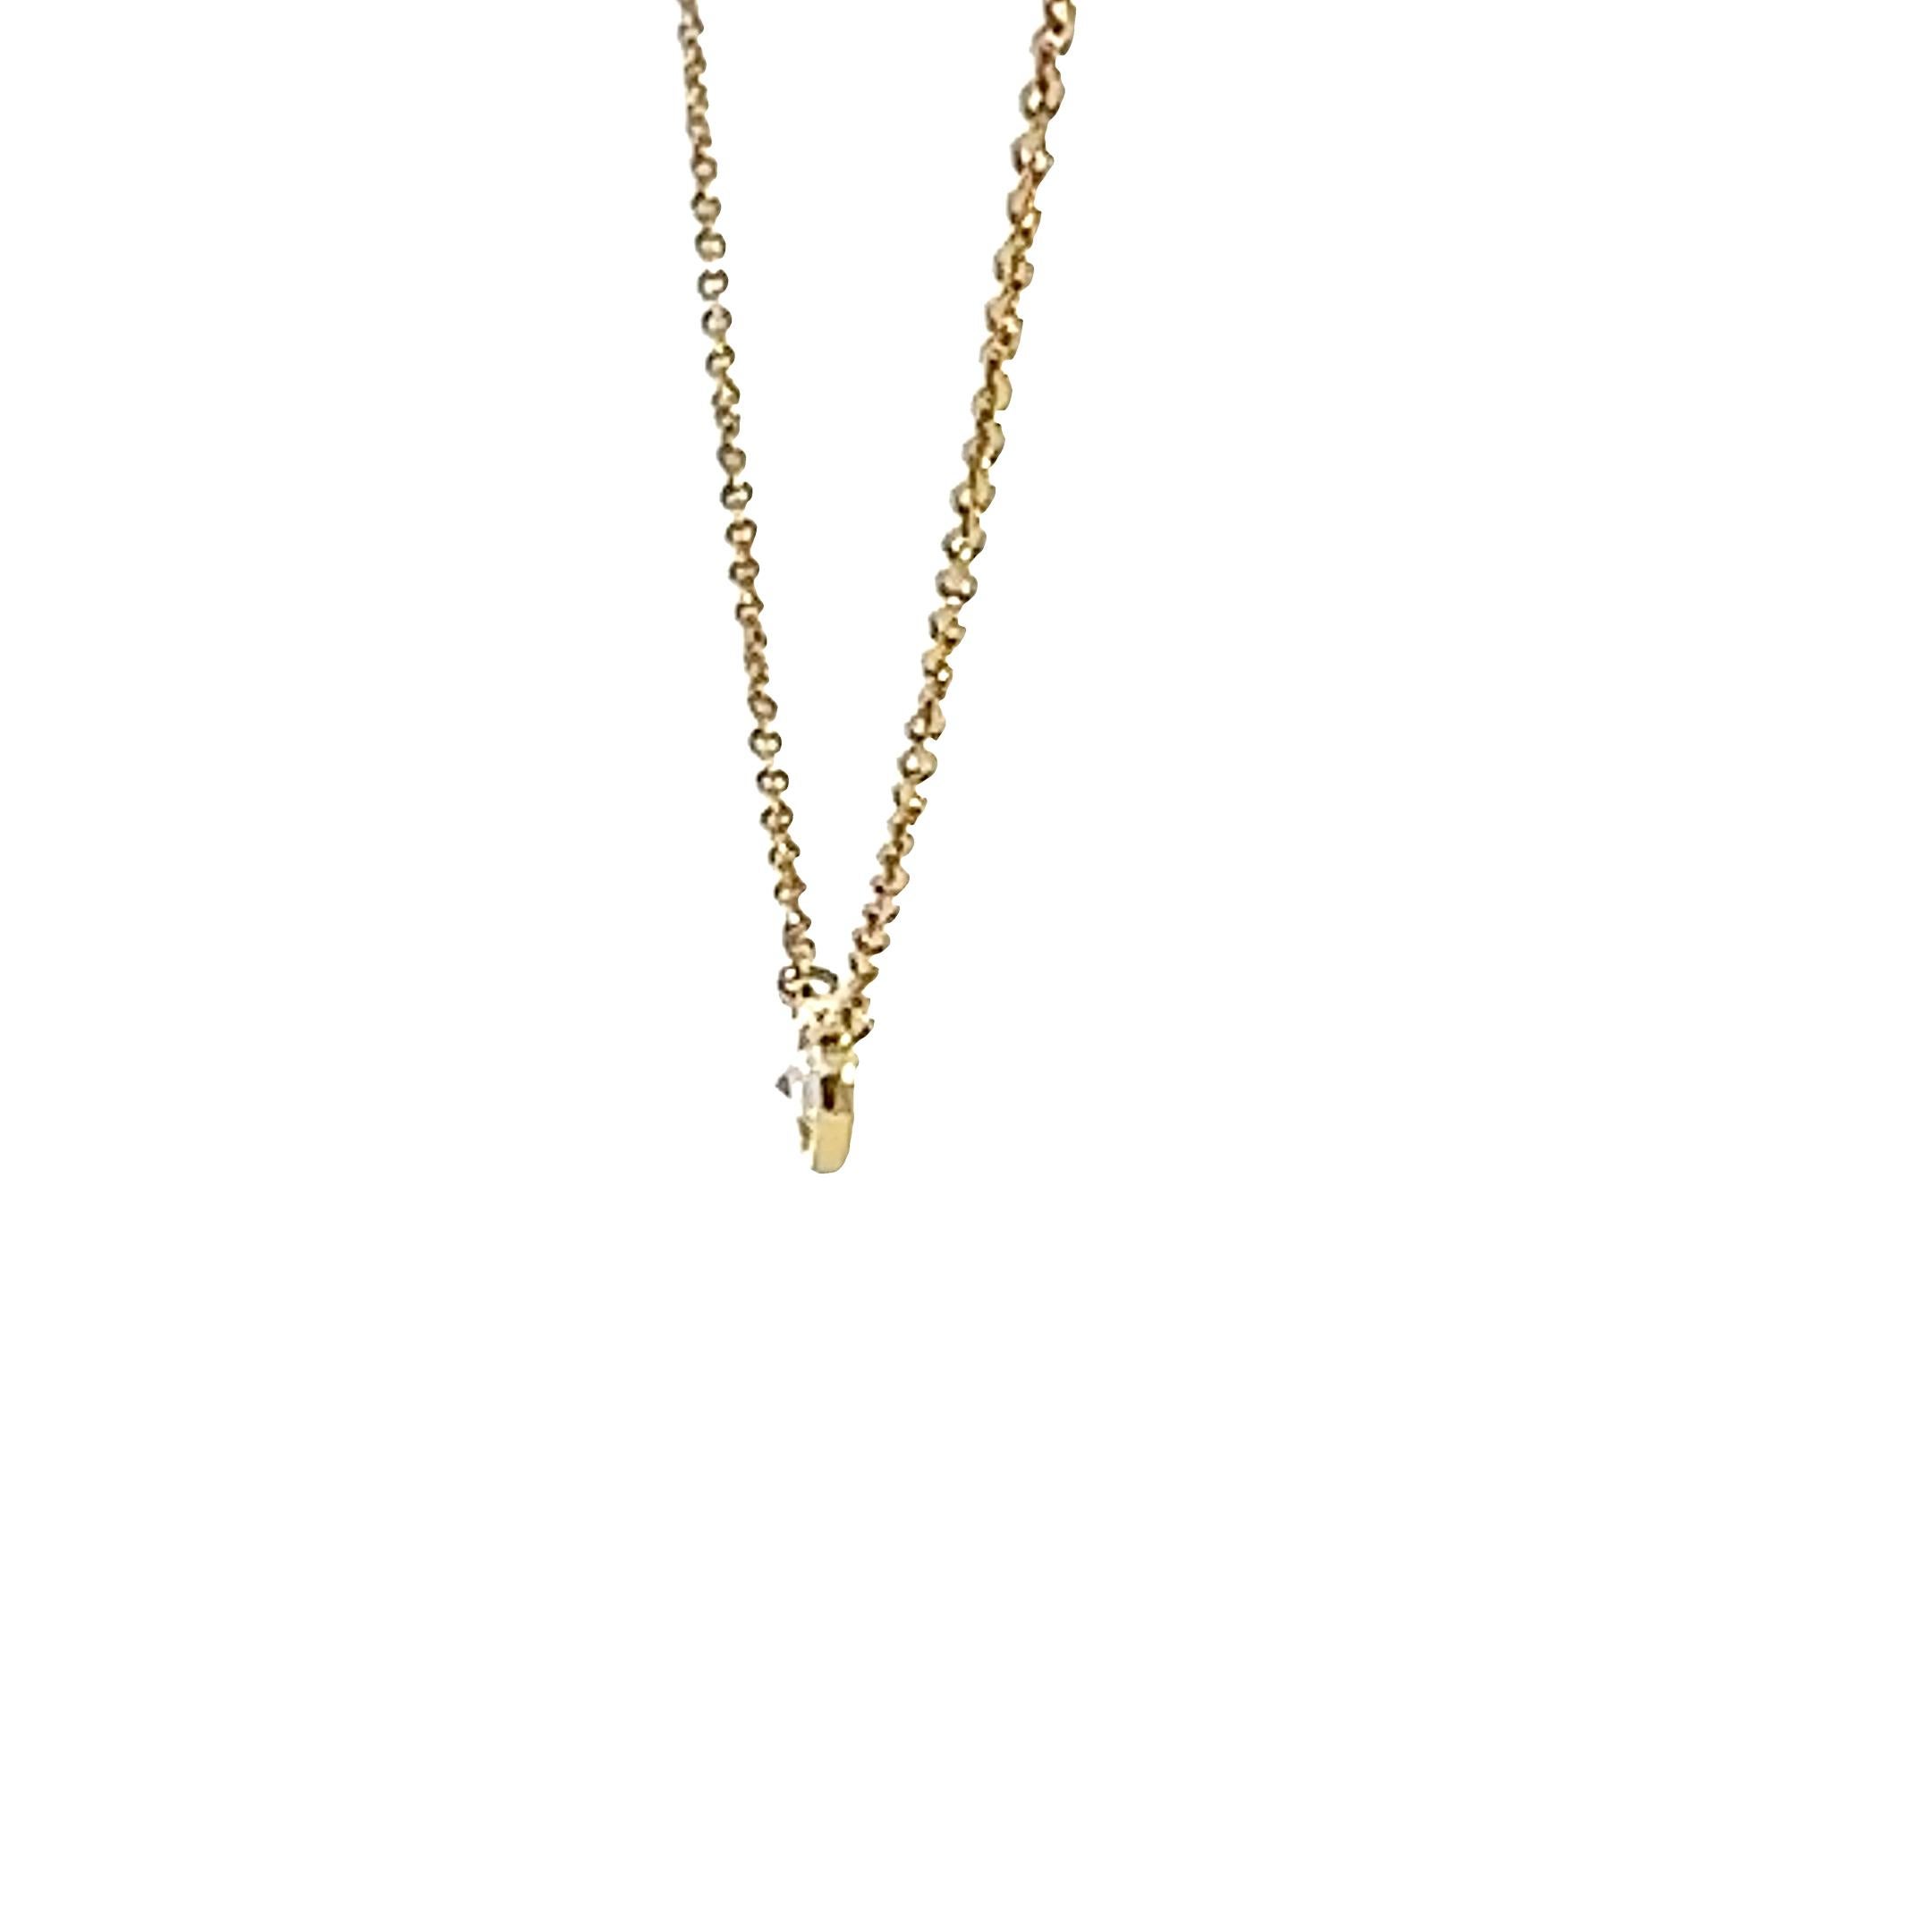 Iconic Elsa Peretti Diamonds by the Yard® Single Diamond Pendant by Tiffany & Co. offered by Alex & Co. A single hand-polished bezel set brilliant cut diamond shines at the center of this delicate and refined 18K yellow gold pendant. The diamond